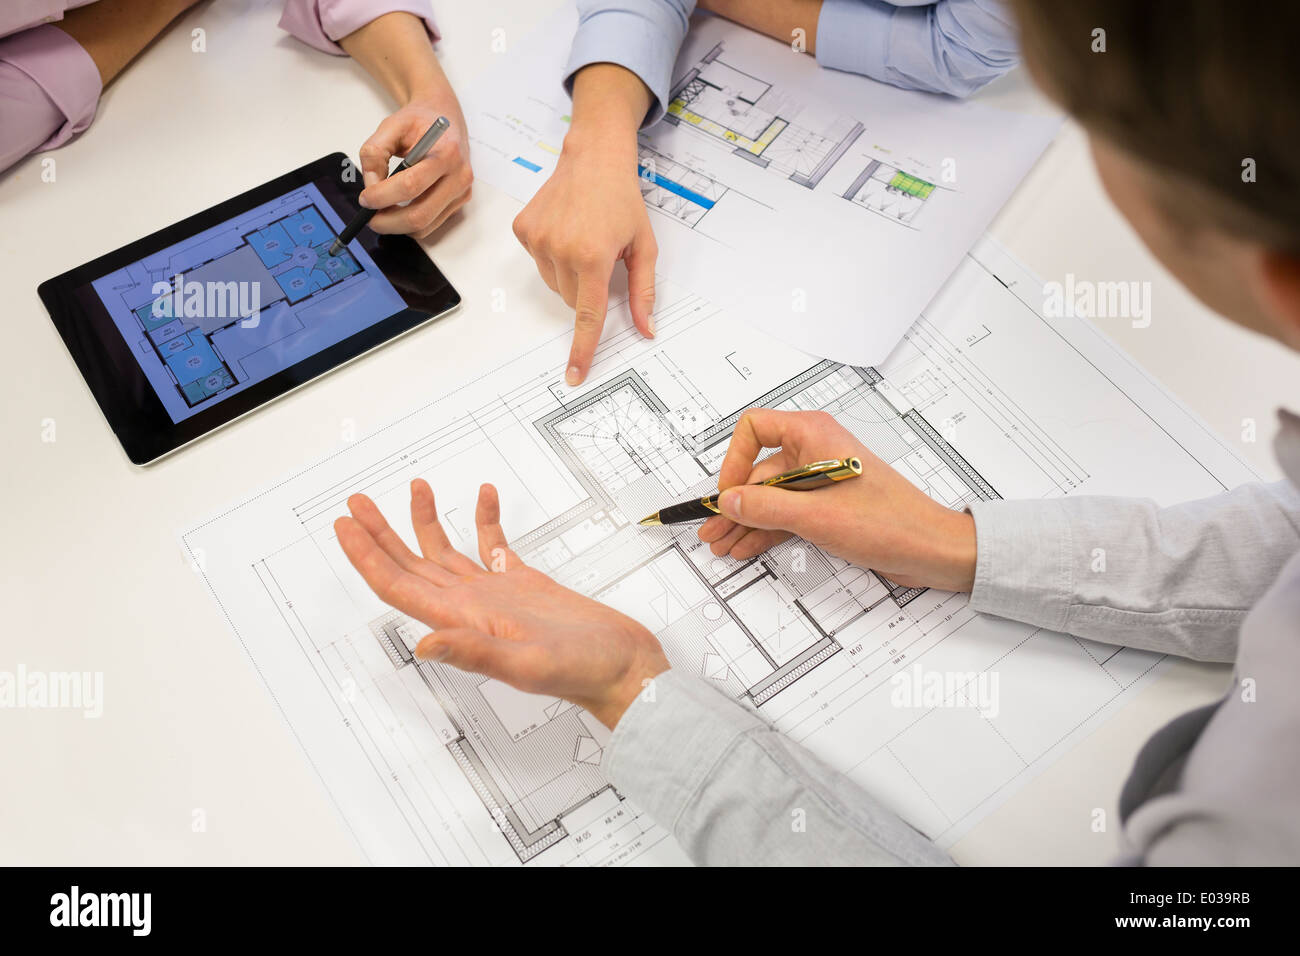 Team architects working on blueprints construction project in office Stock Photo